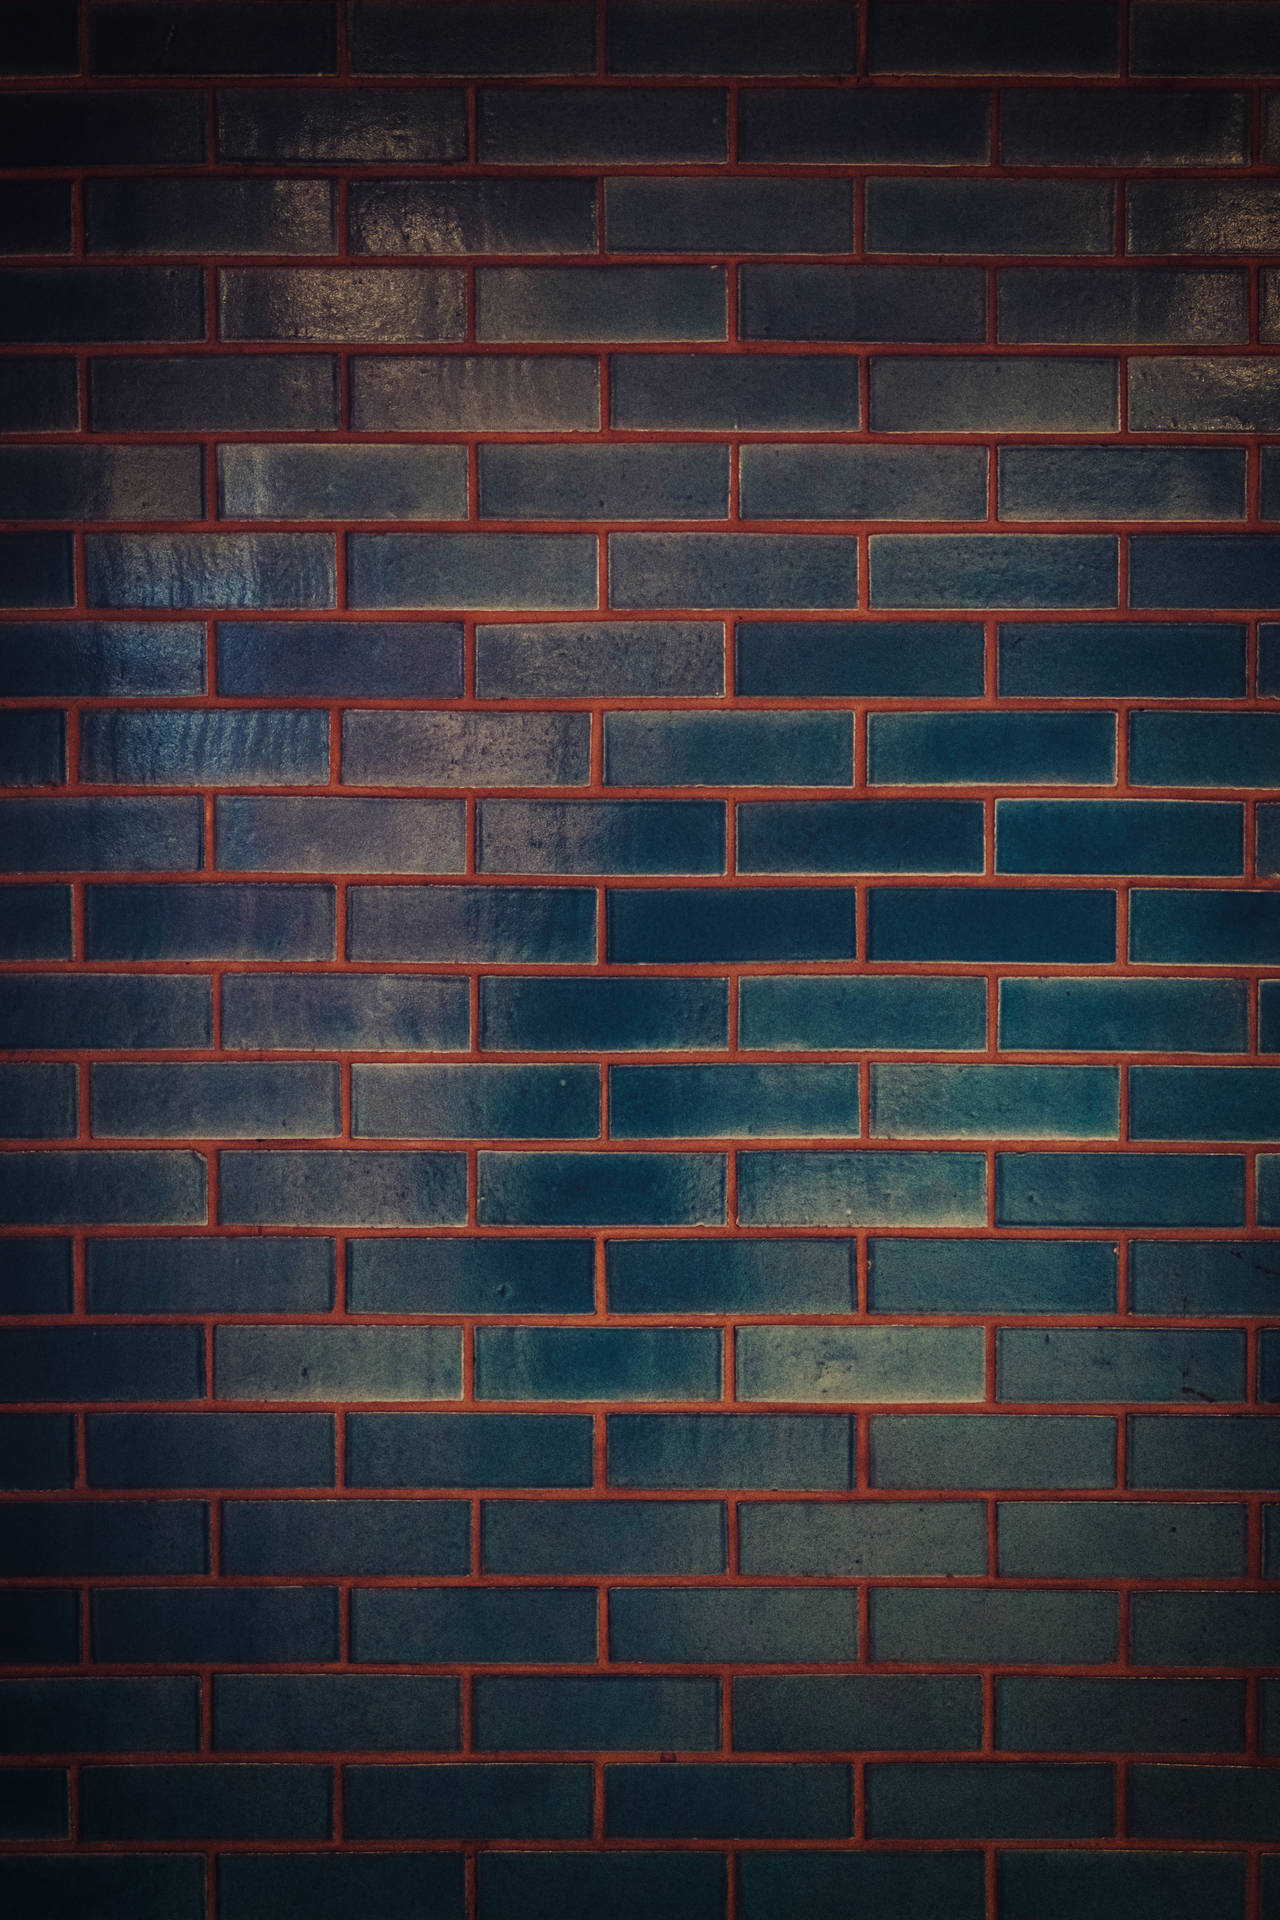 Black Brick Wall With Red Wallpaper